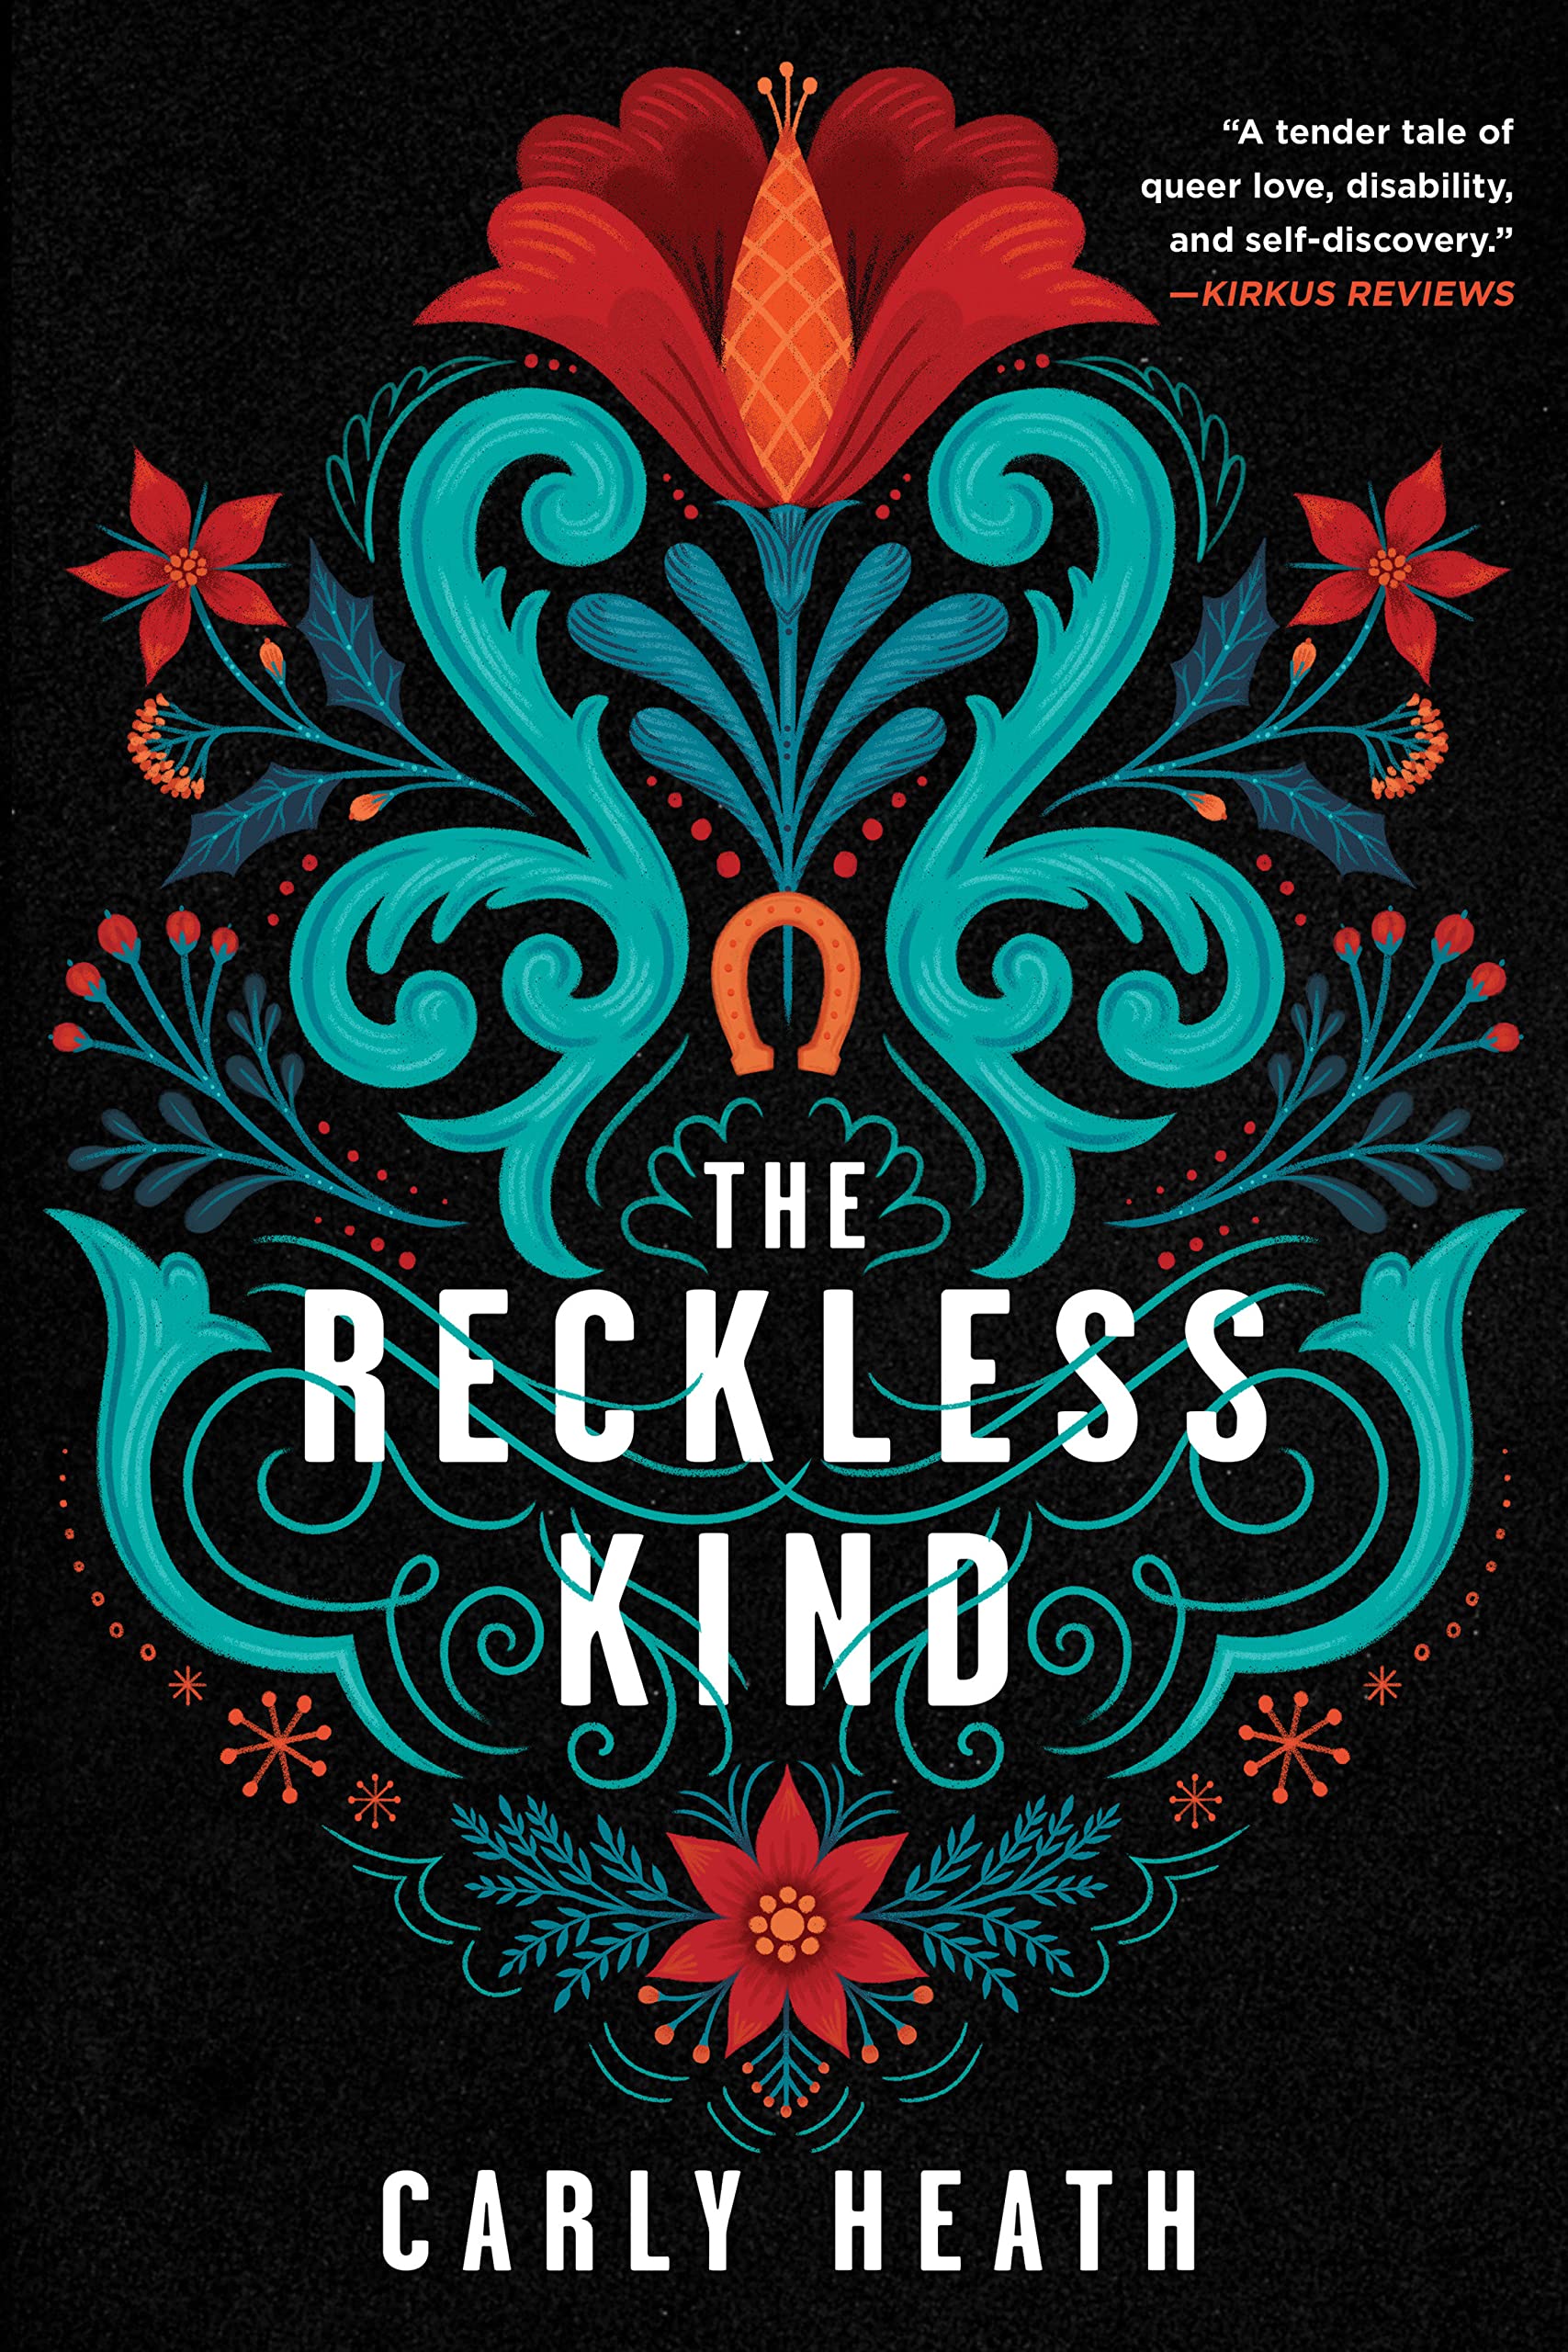 Cover of “The Reckless Kind” by Carly Heath